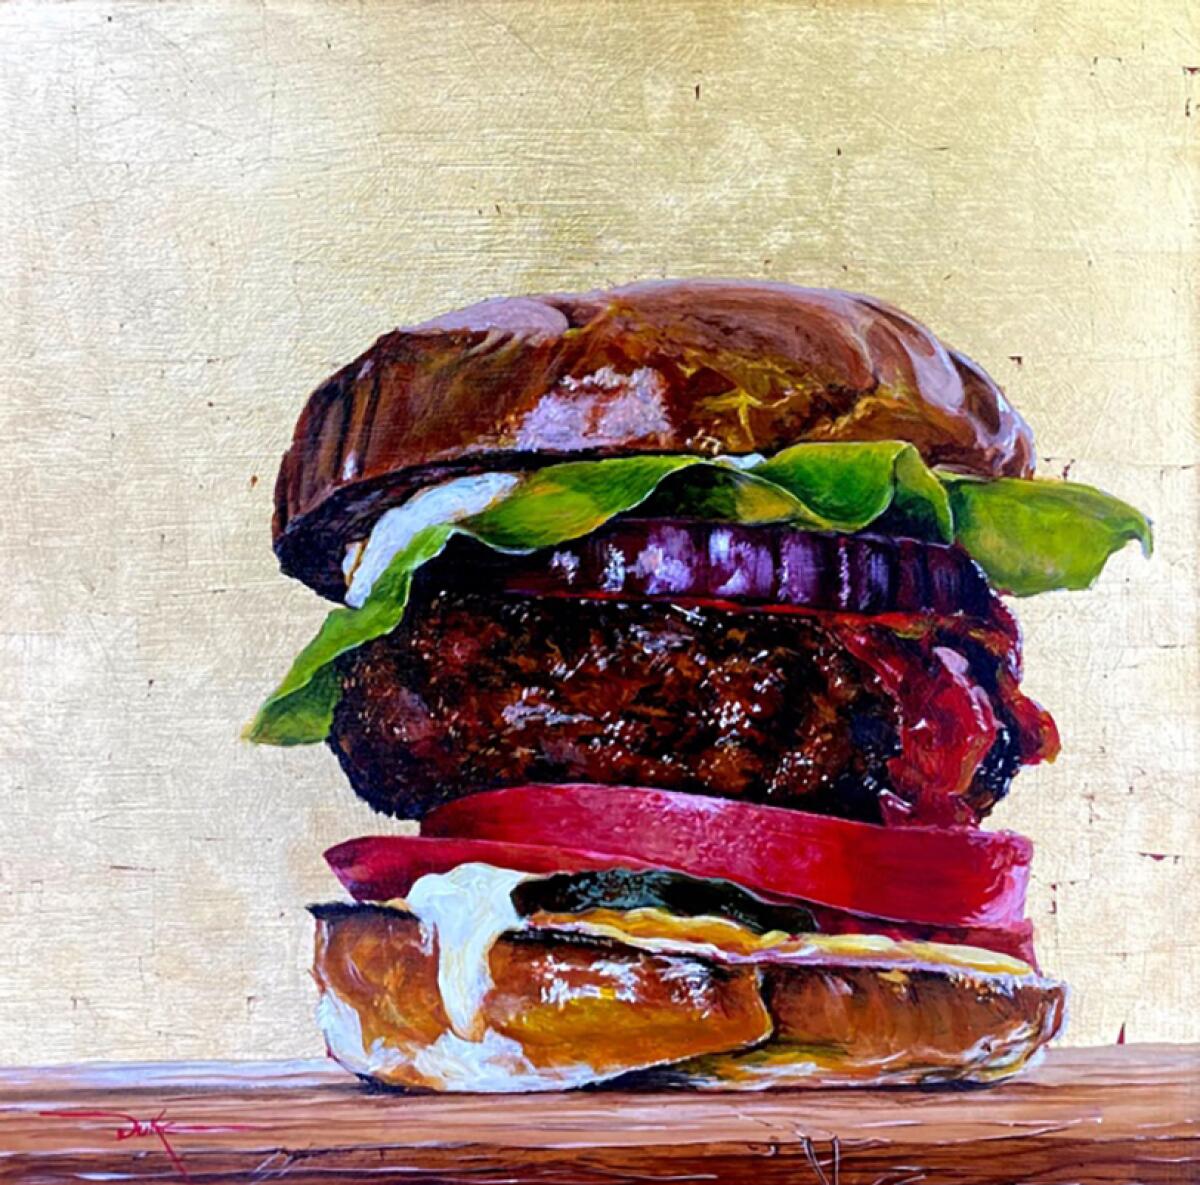 "Where's the Beef" by Duke Windsor (2020, acrylic and gold leaf)